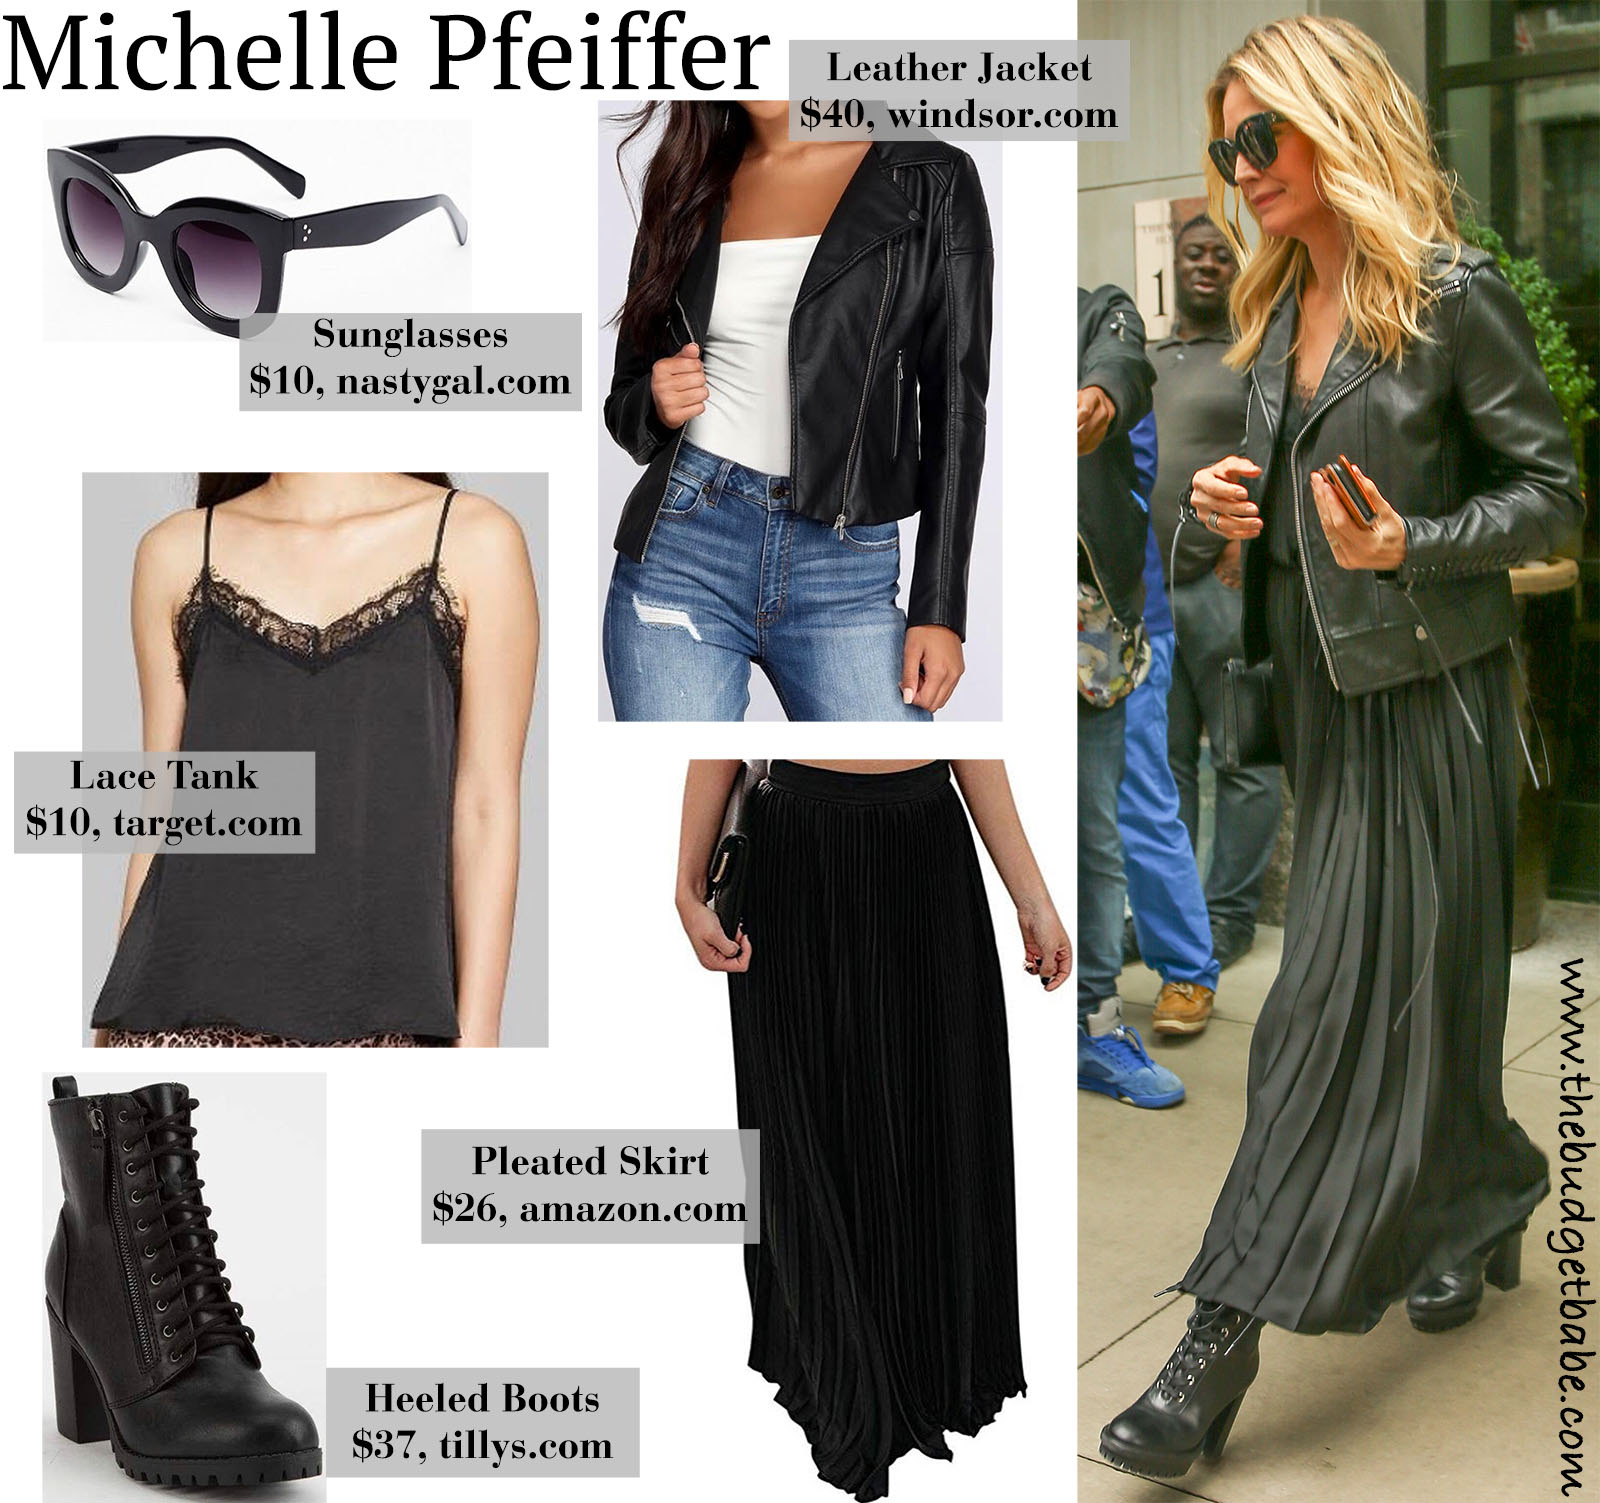 Actress Michelle Pfeiffer looks sexy in a black leather moto jacket, lace cami tank, pleated maxi skirt, and heeled combat boots!